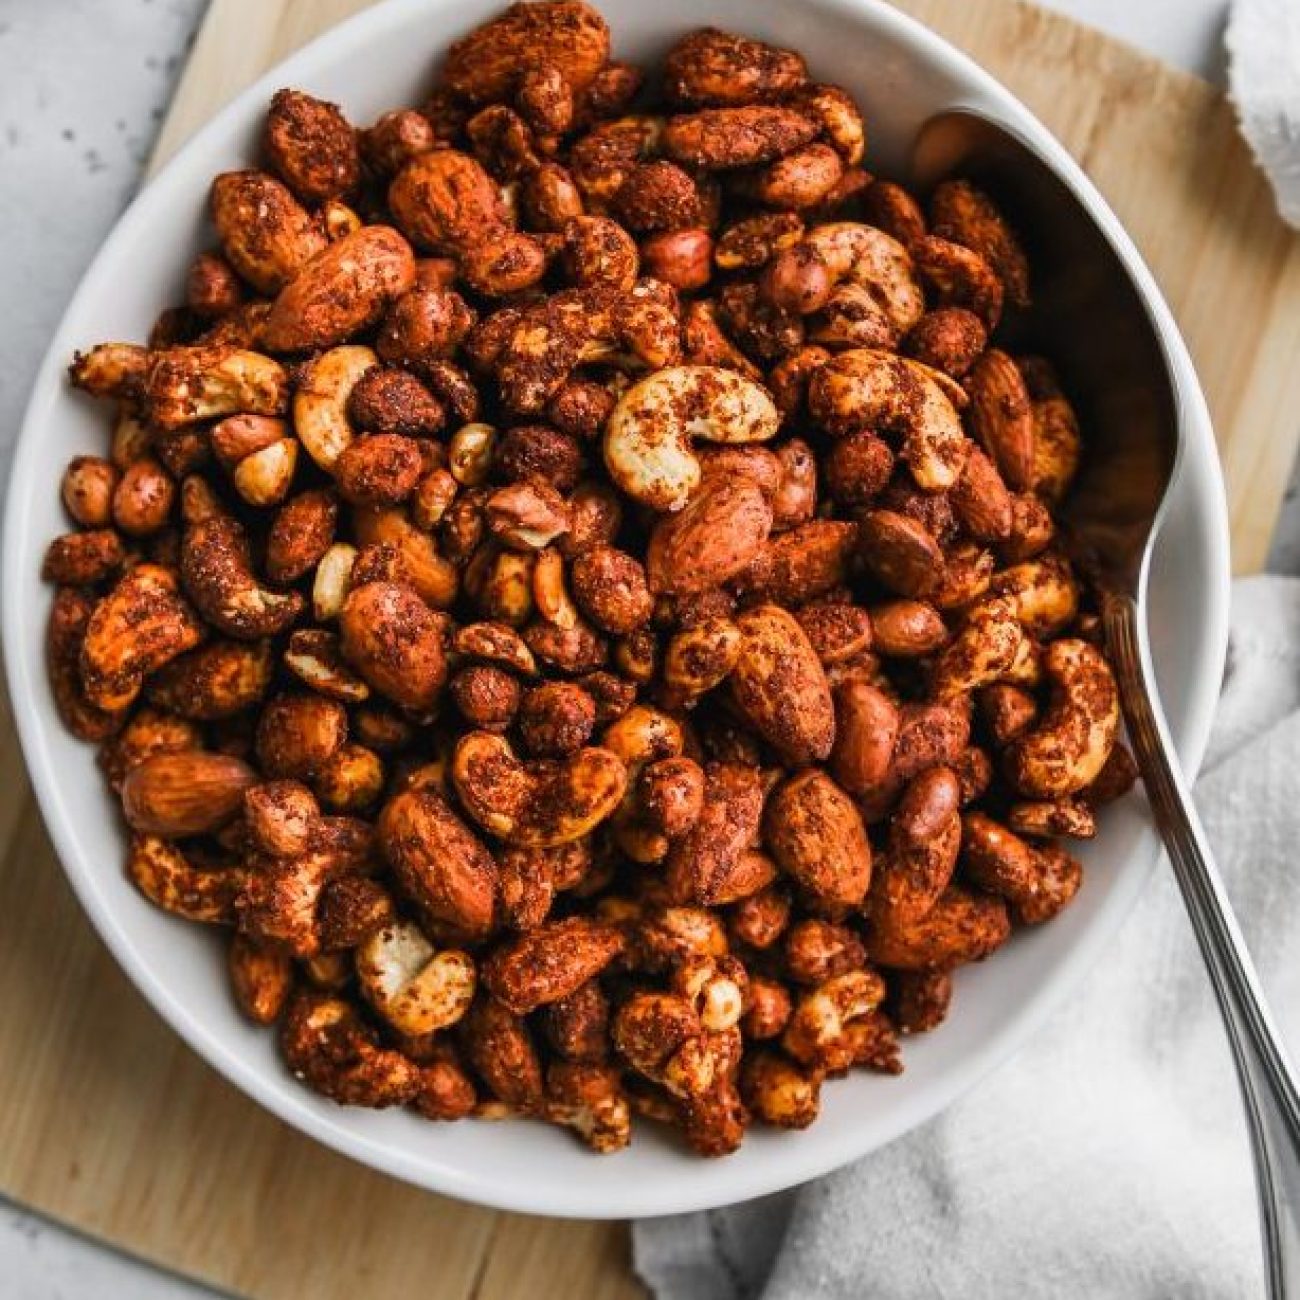 Spicy Nut Mix for the South Beach Diet: A Flavorful Snack Recipe